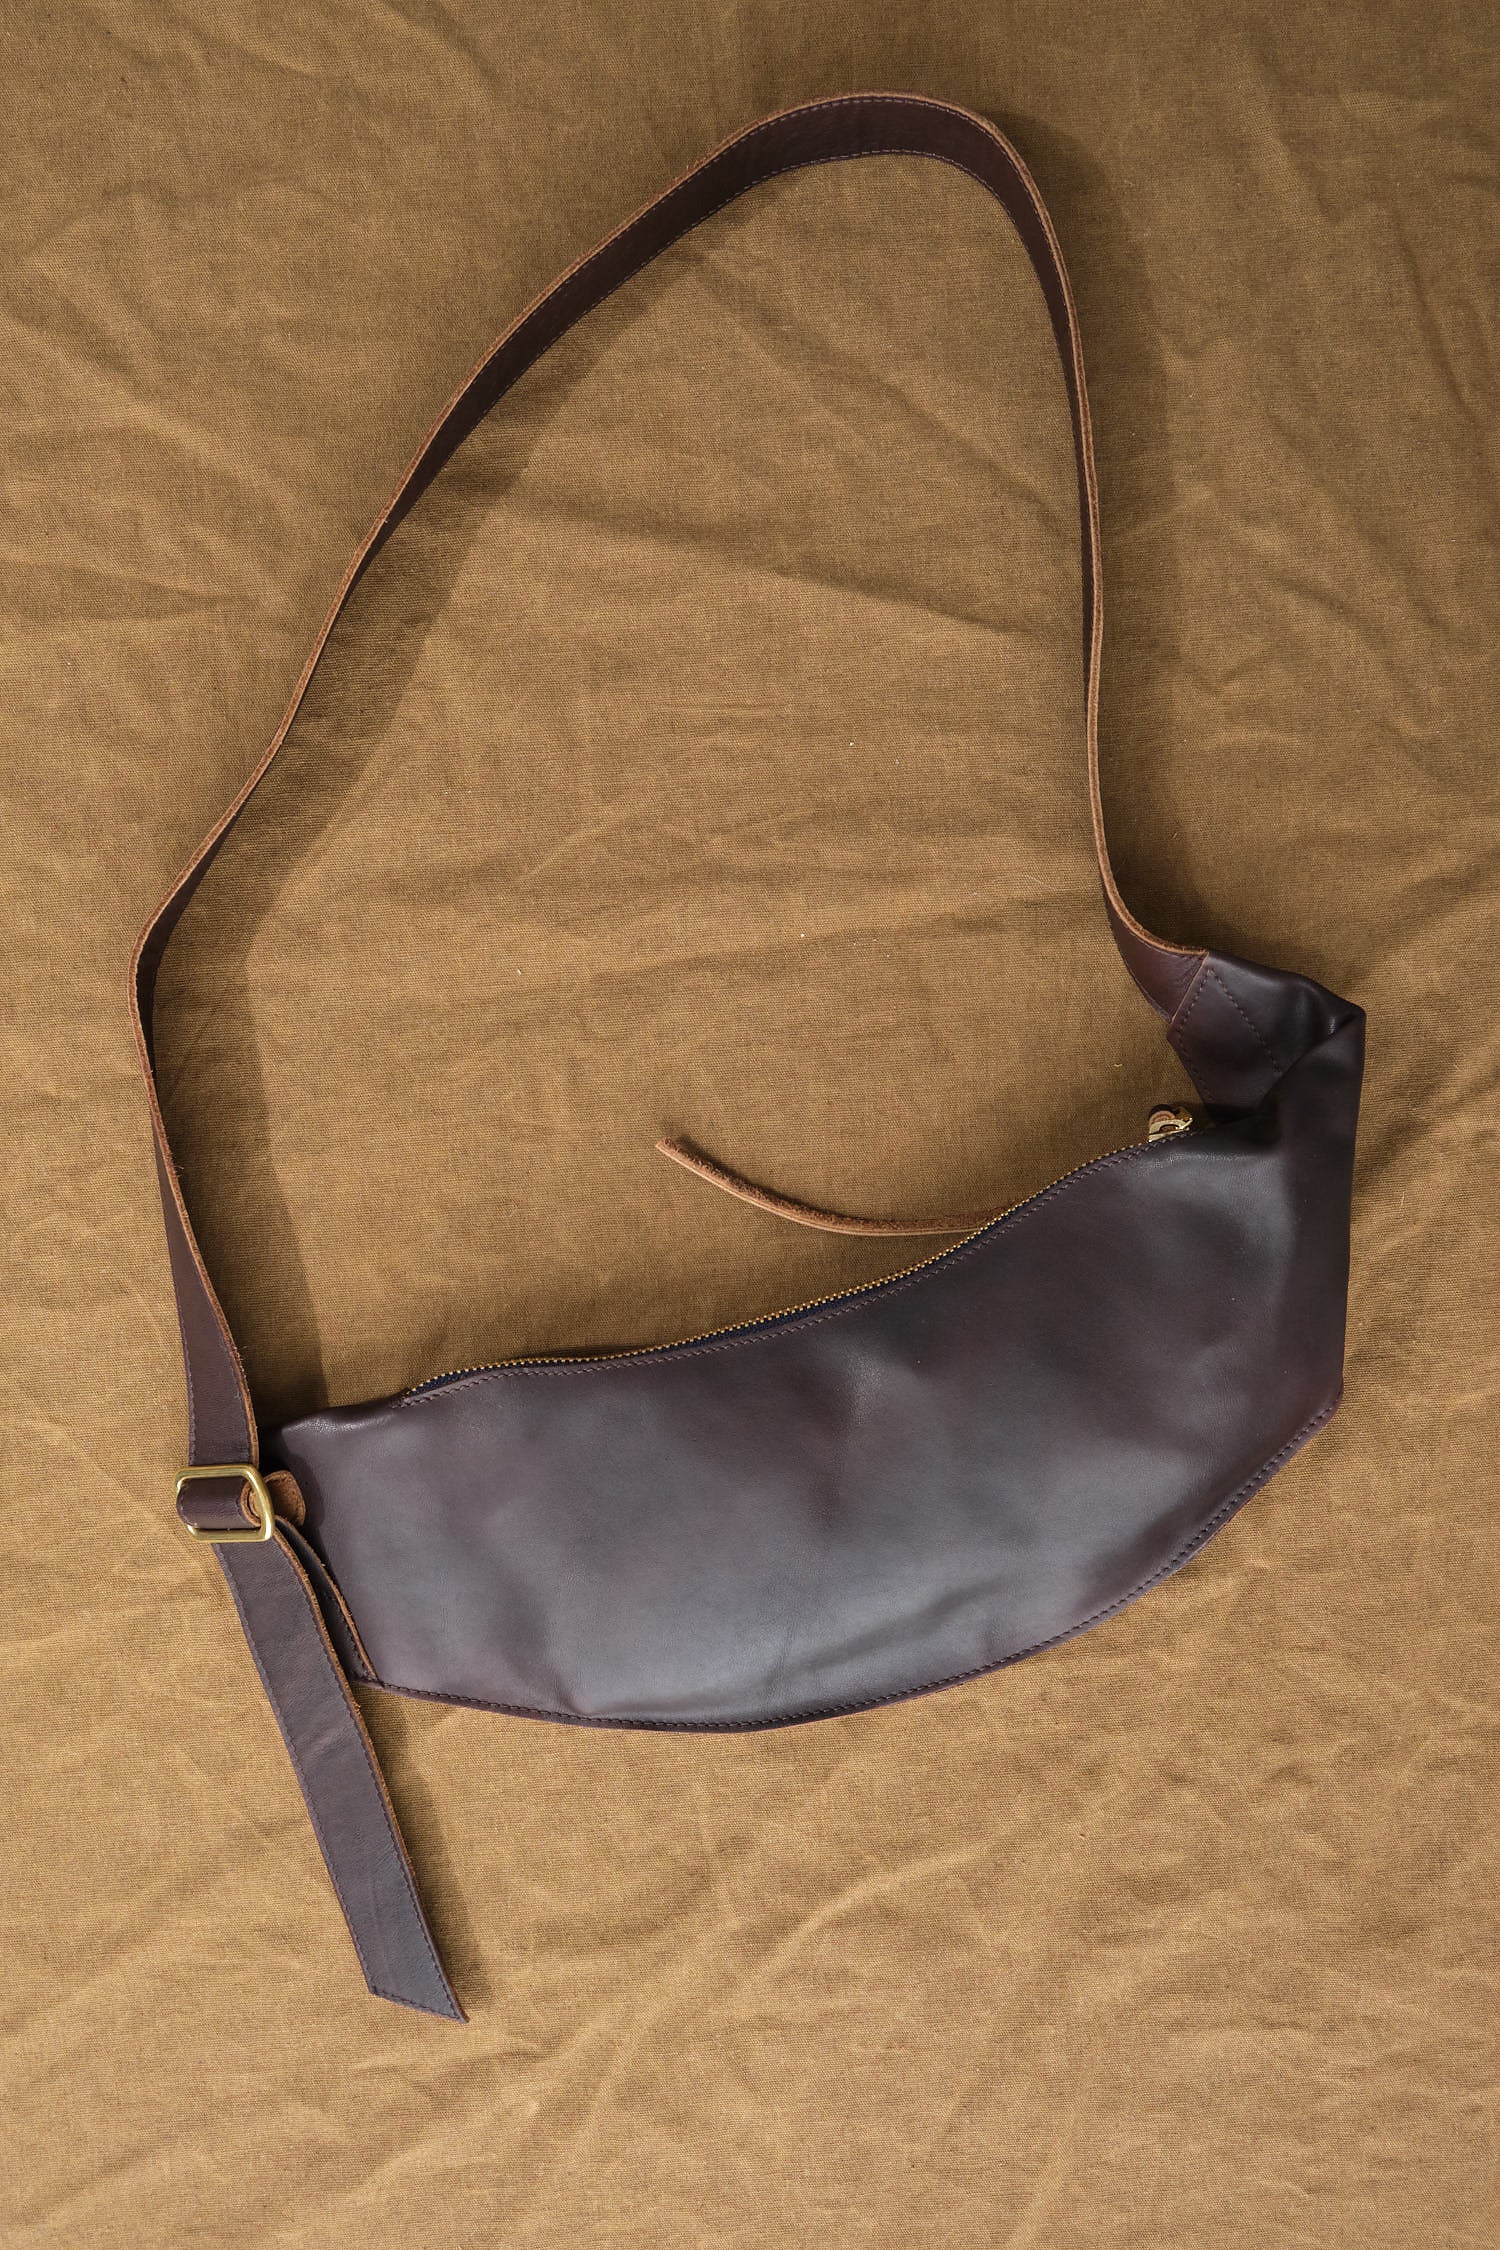 Sling Pouch in Walnut on table